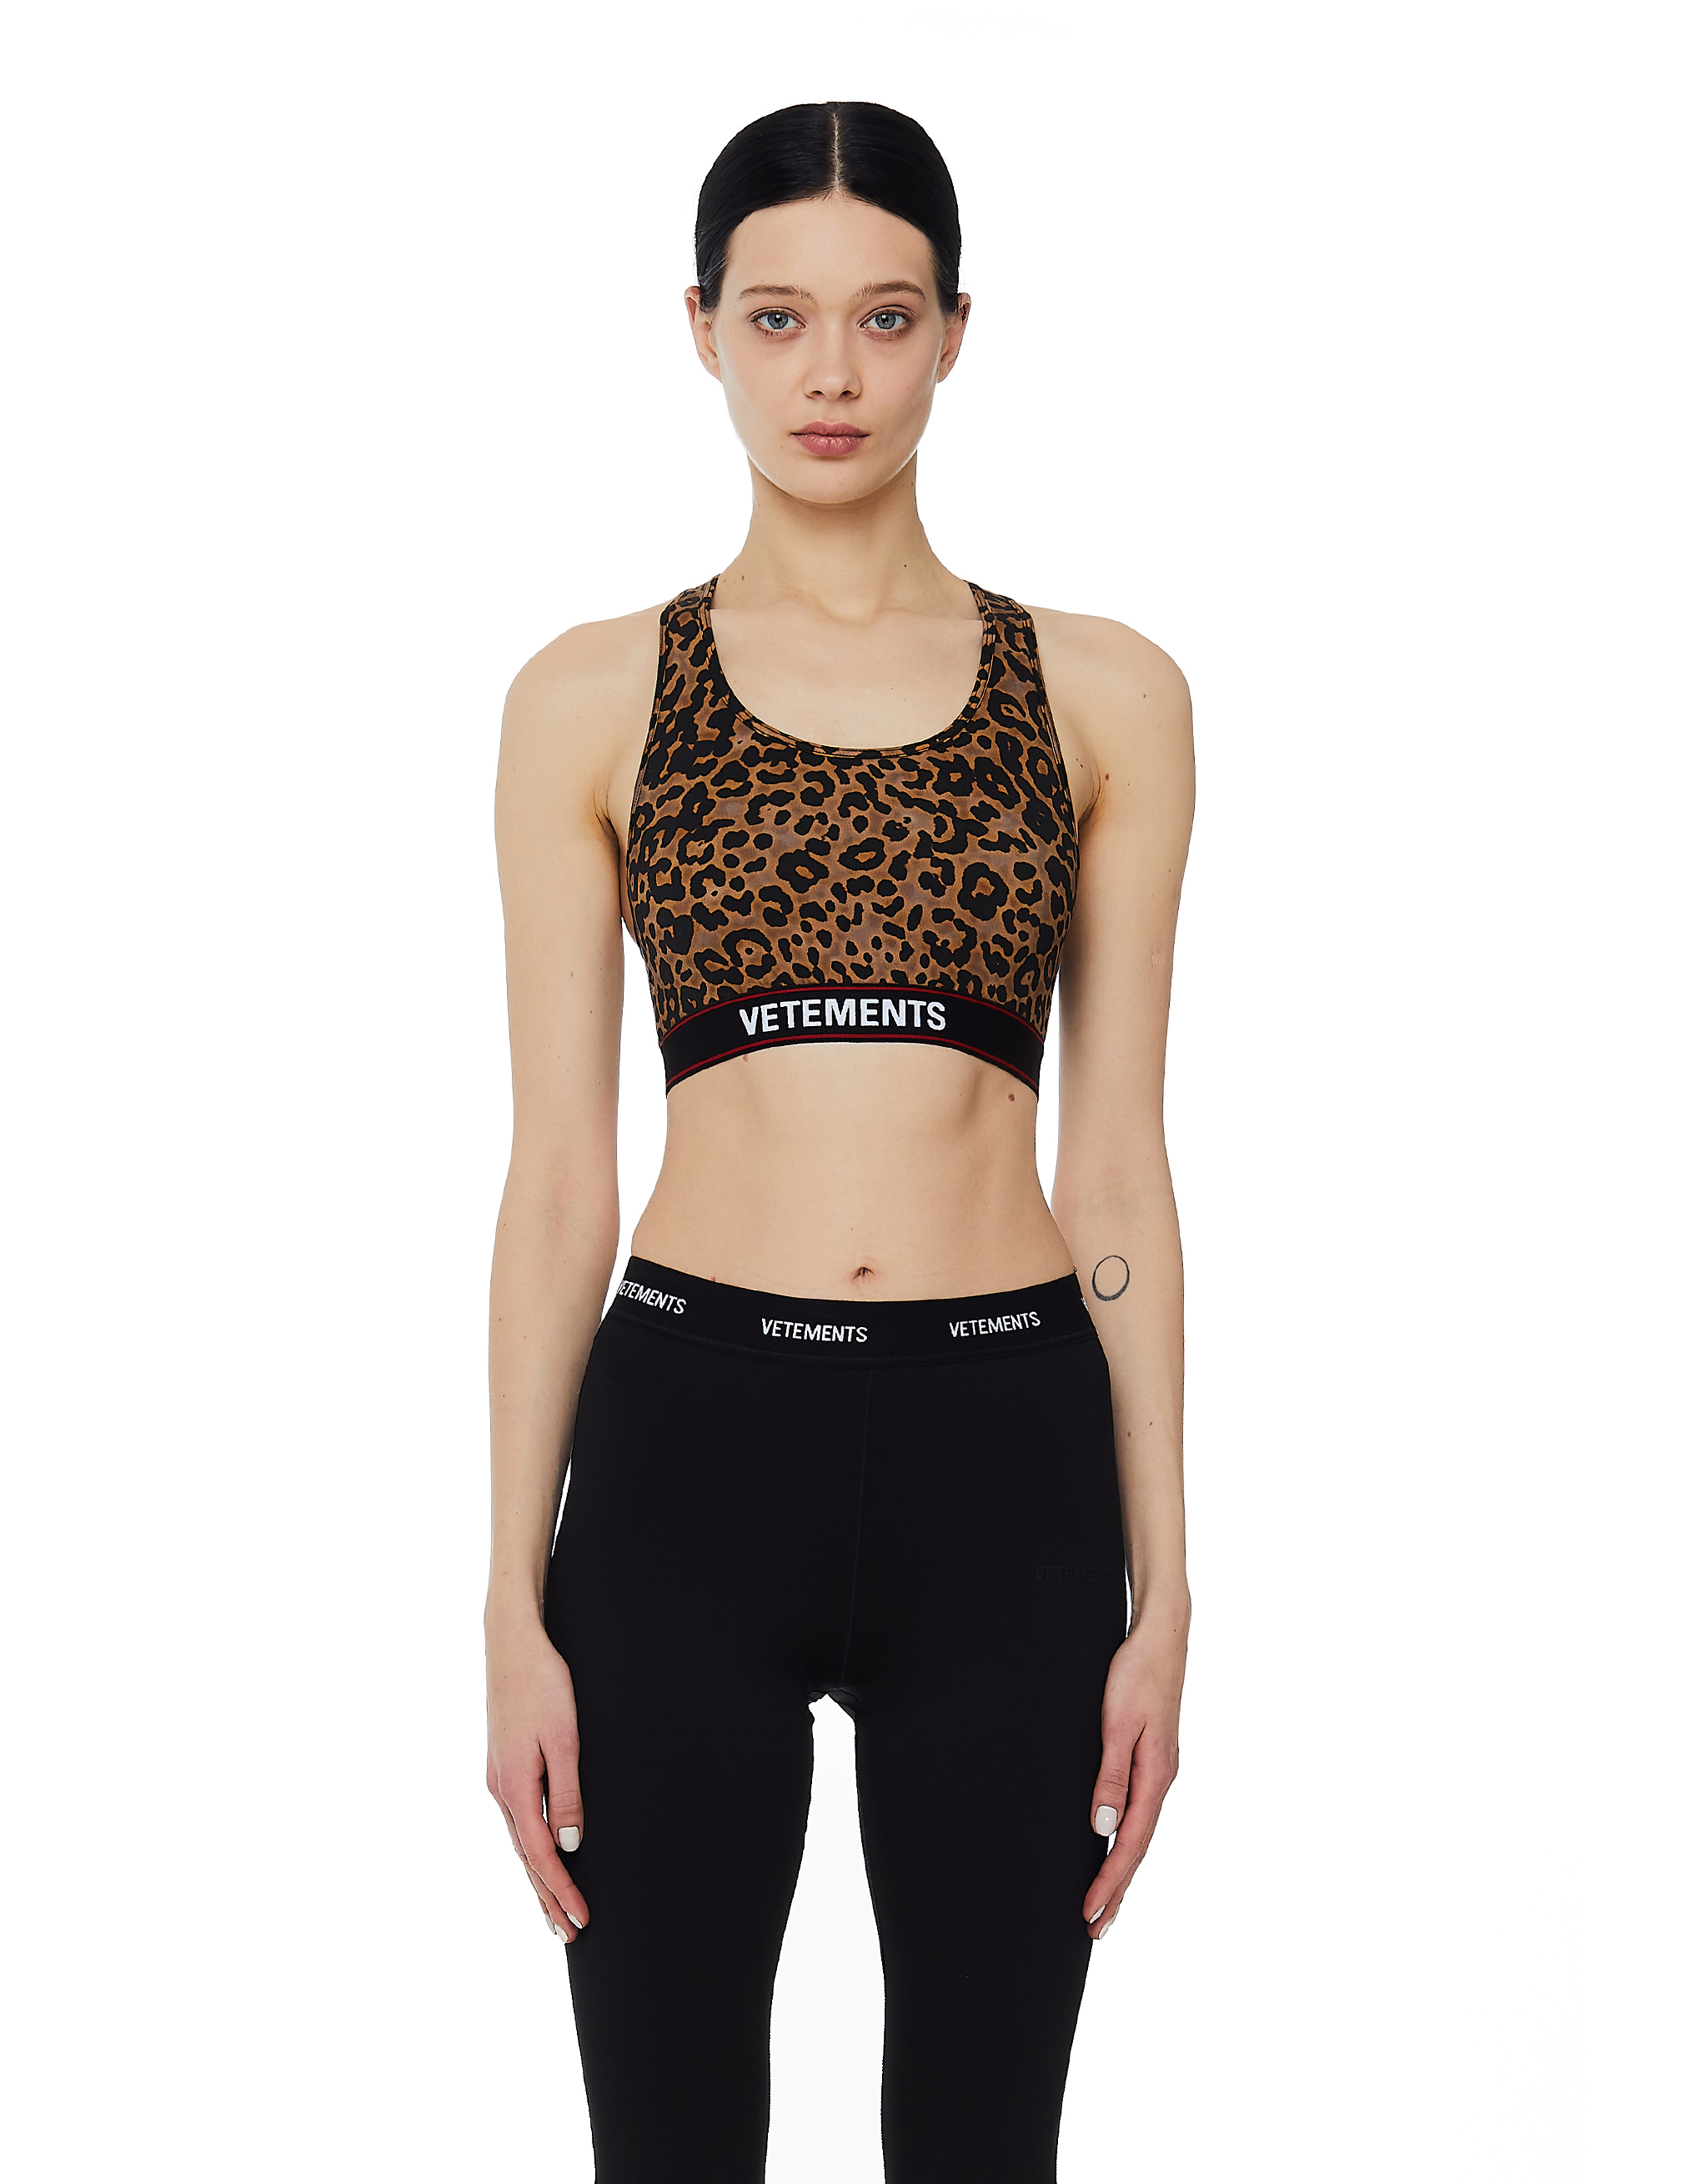 Leopard Top Vetements WE51TO100L/1332, размер XL;L;M;S WE51TO100L/1332 - фото 1